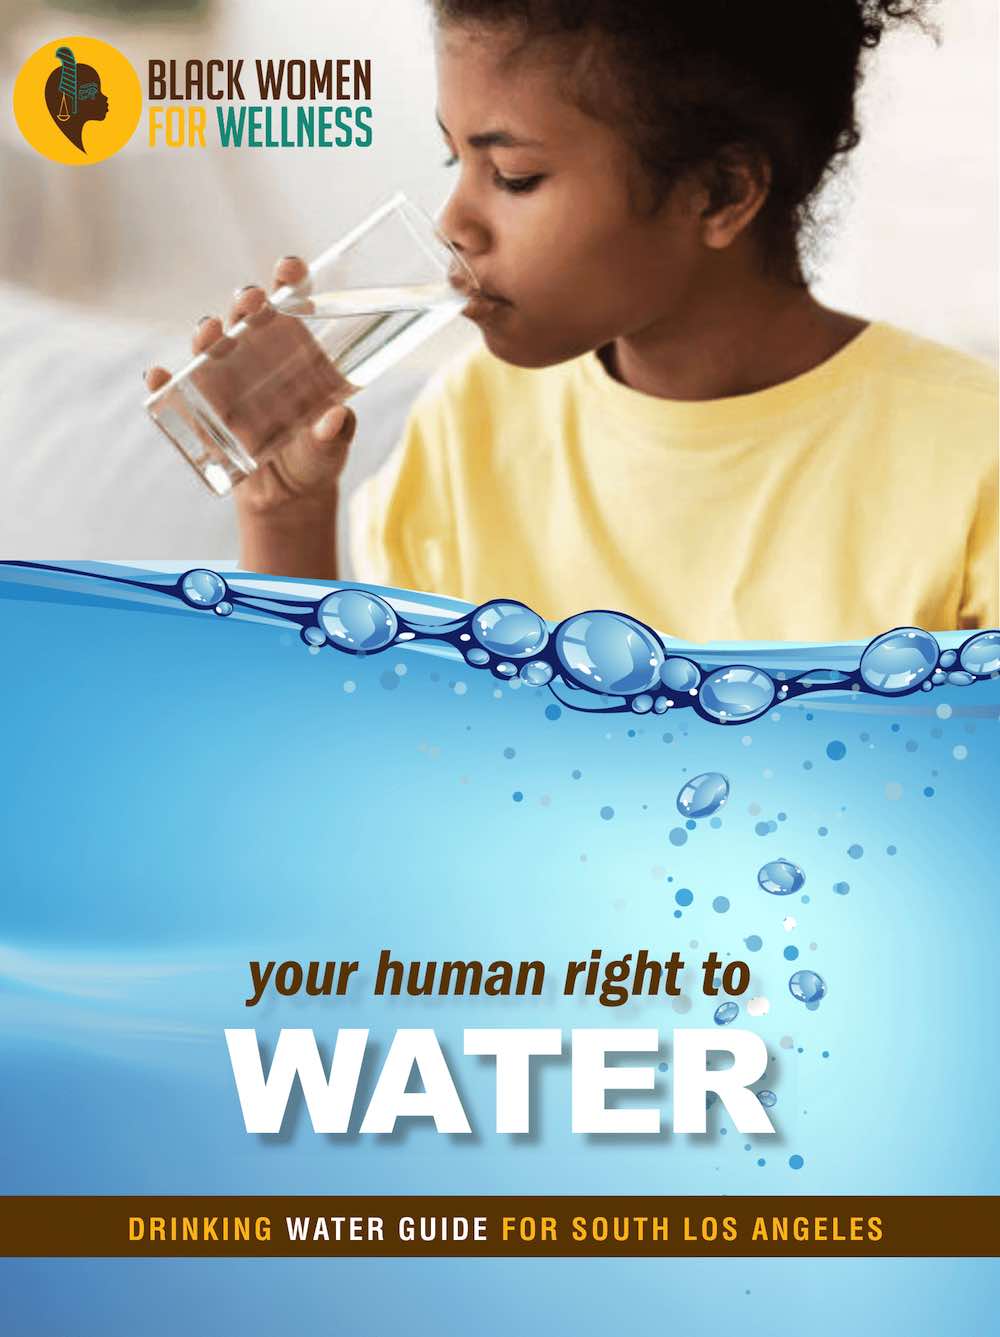 Drinking Water Guide for Water Quality in South Los Angeles